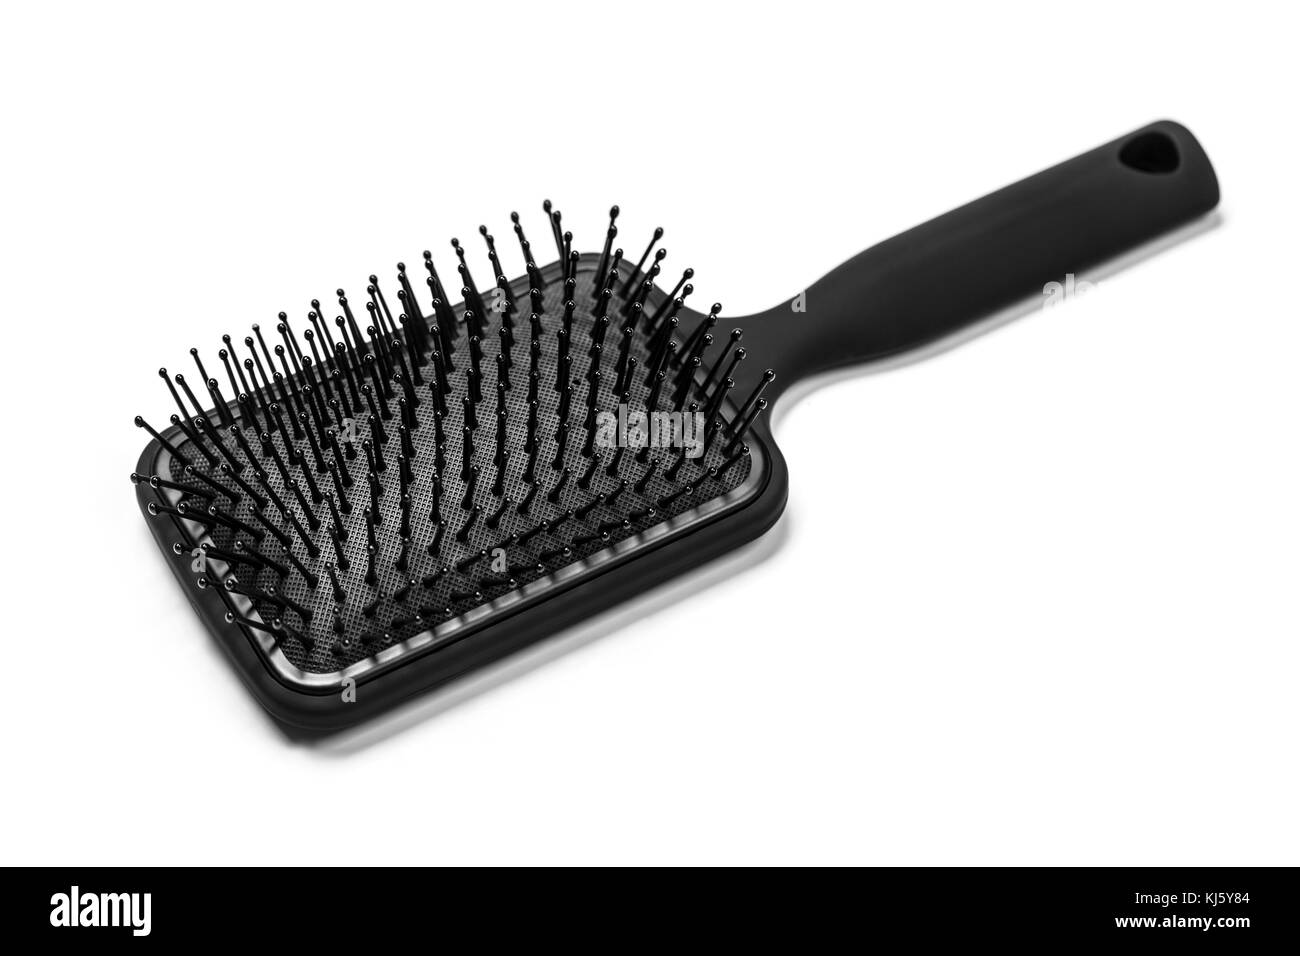 Hair brush with a black handle isolated on white Stock Photo